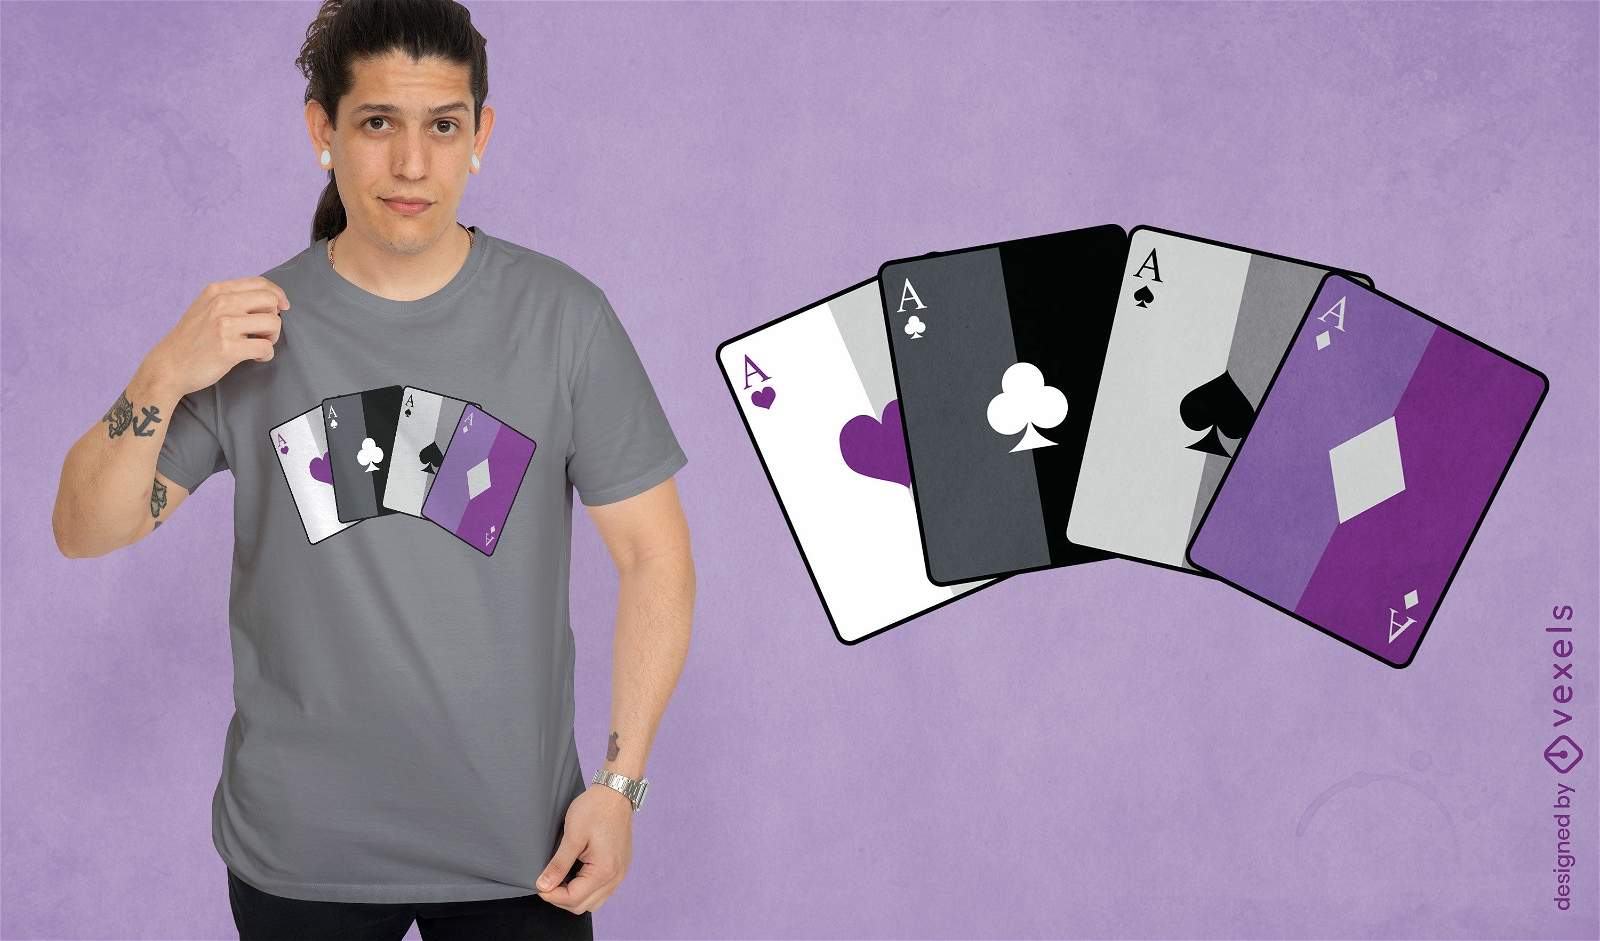 Asexual playing cards t-shirt design